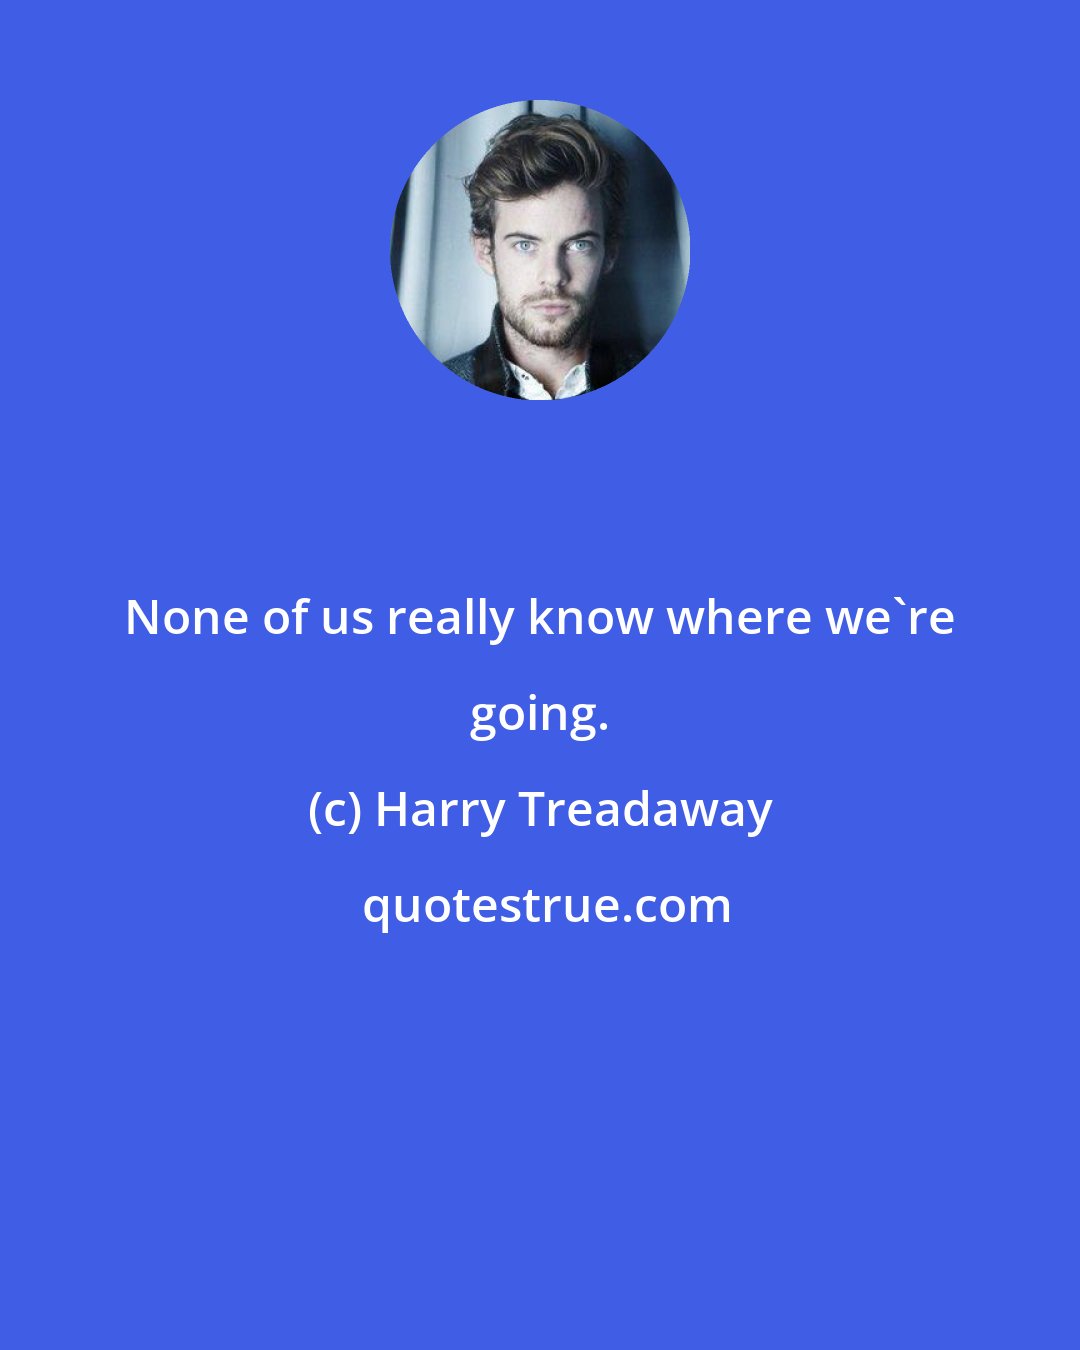 Harry Treadaway: None of us really know where we're going.